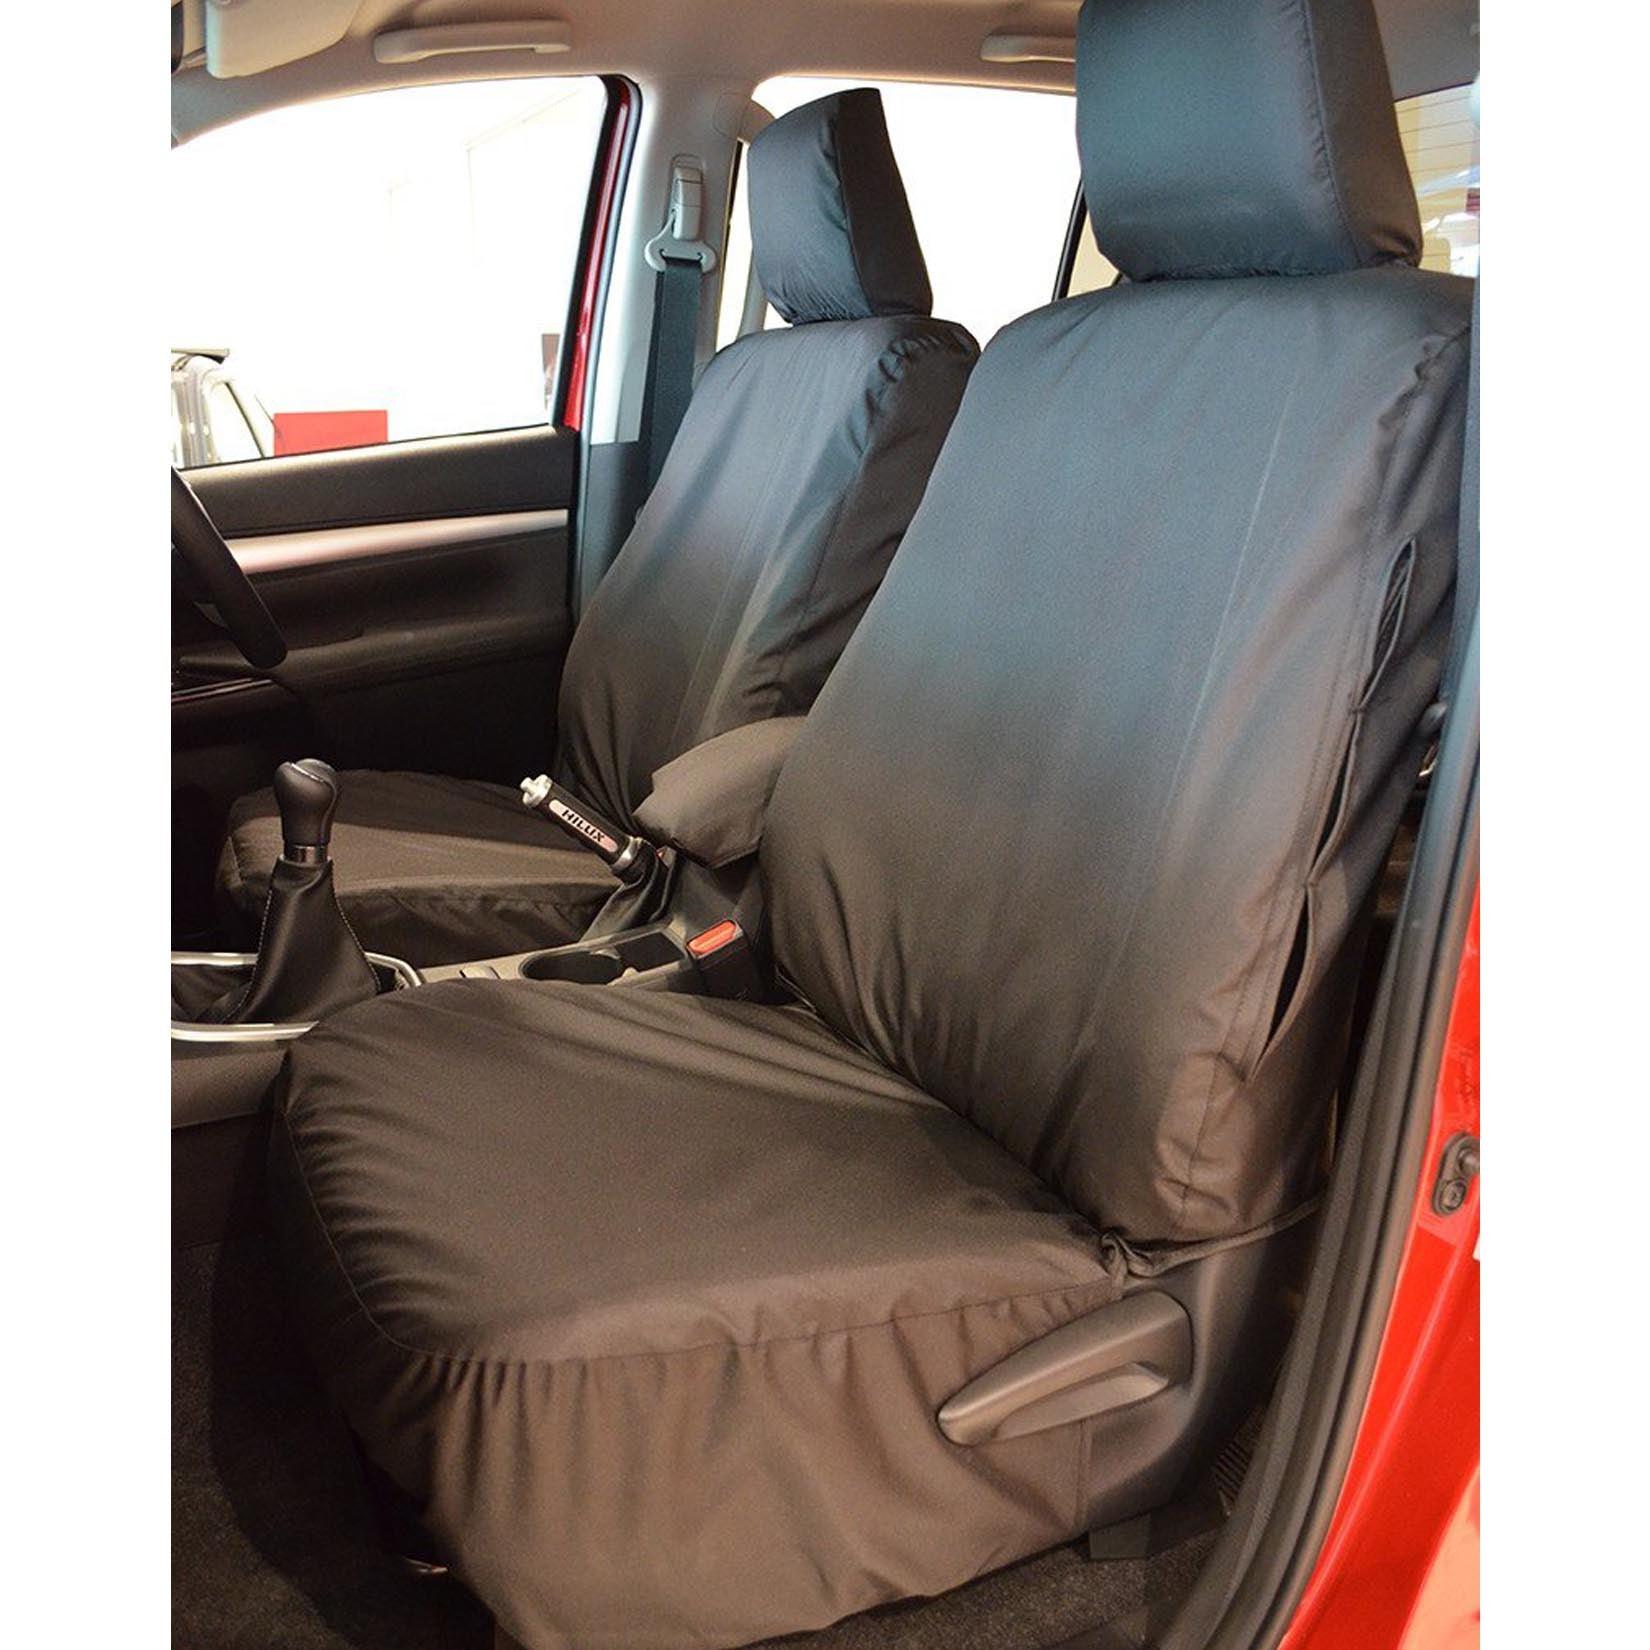 TOYOTA HILUX ACTIVE 2016 ON FRONT PAIR SEAT COVERS - BLACK - Storm Xccessories2